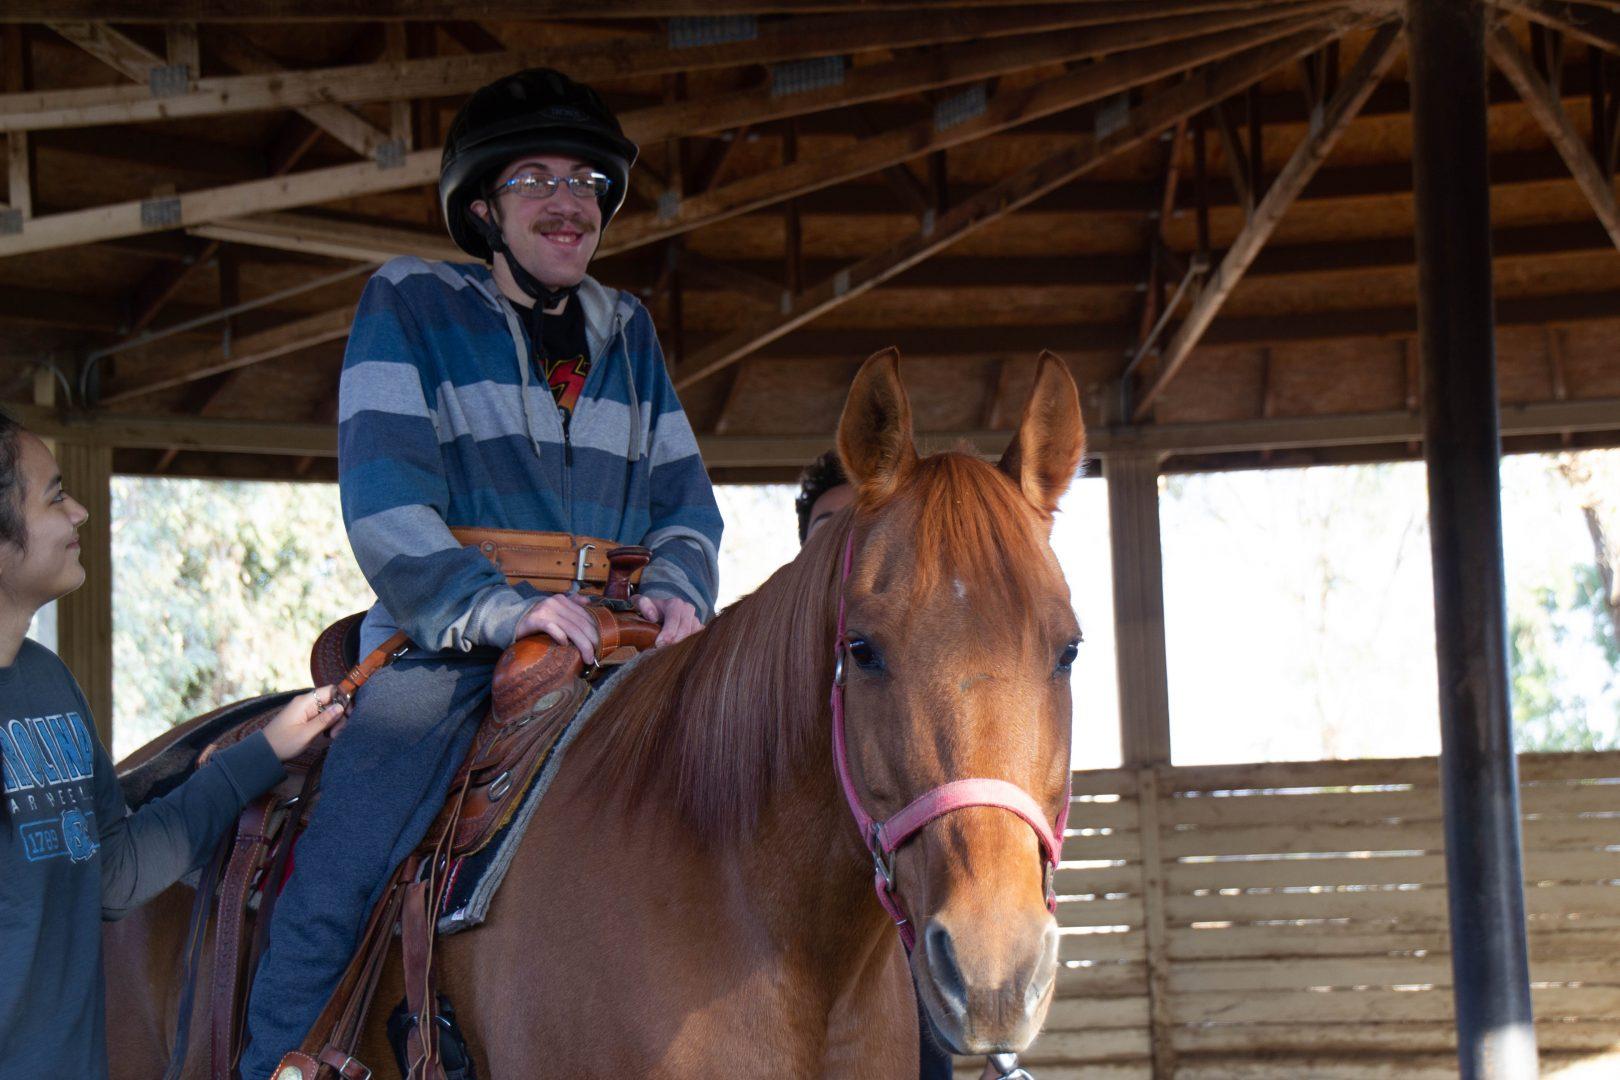 Michael McFadden, who was diagnosed with several illnesses as a child, rides a horse at the Heart of the Horse Therapy Ranch on Nov. 4. (Cassie Richter/The Collegian)